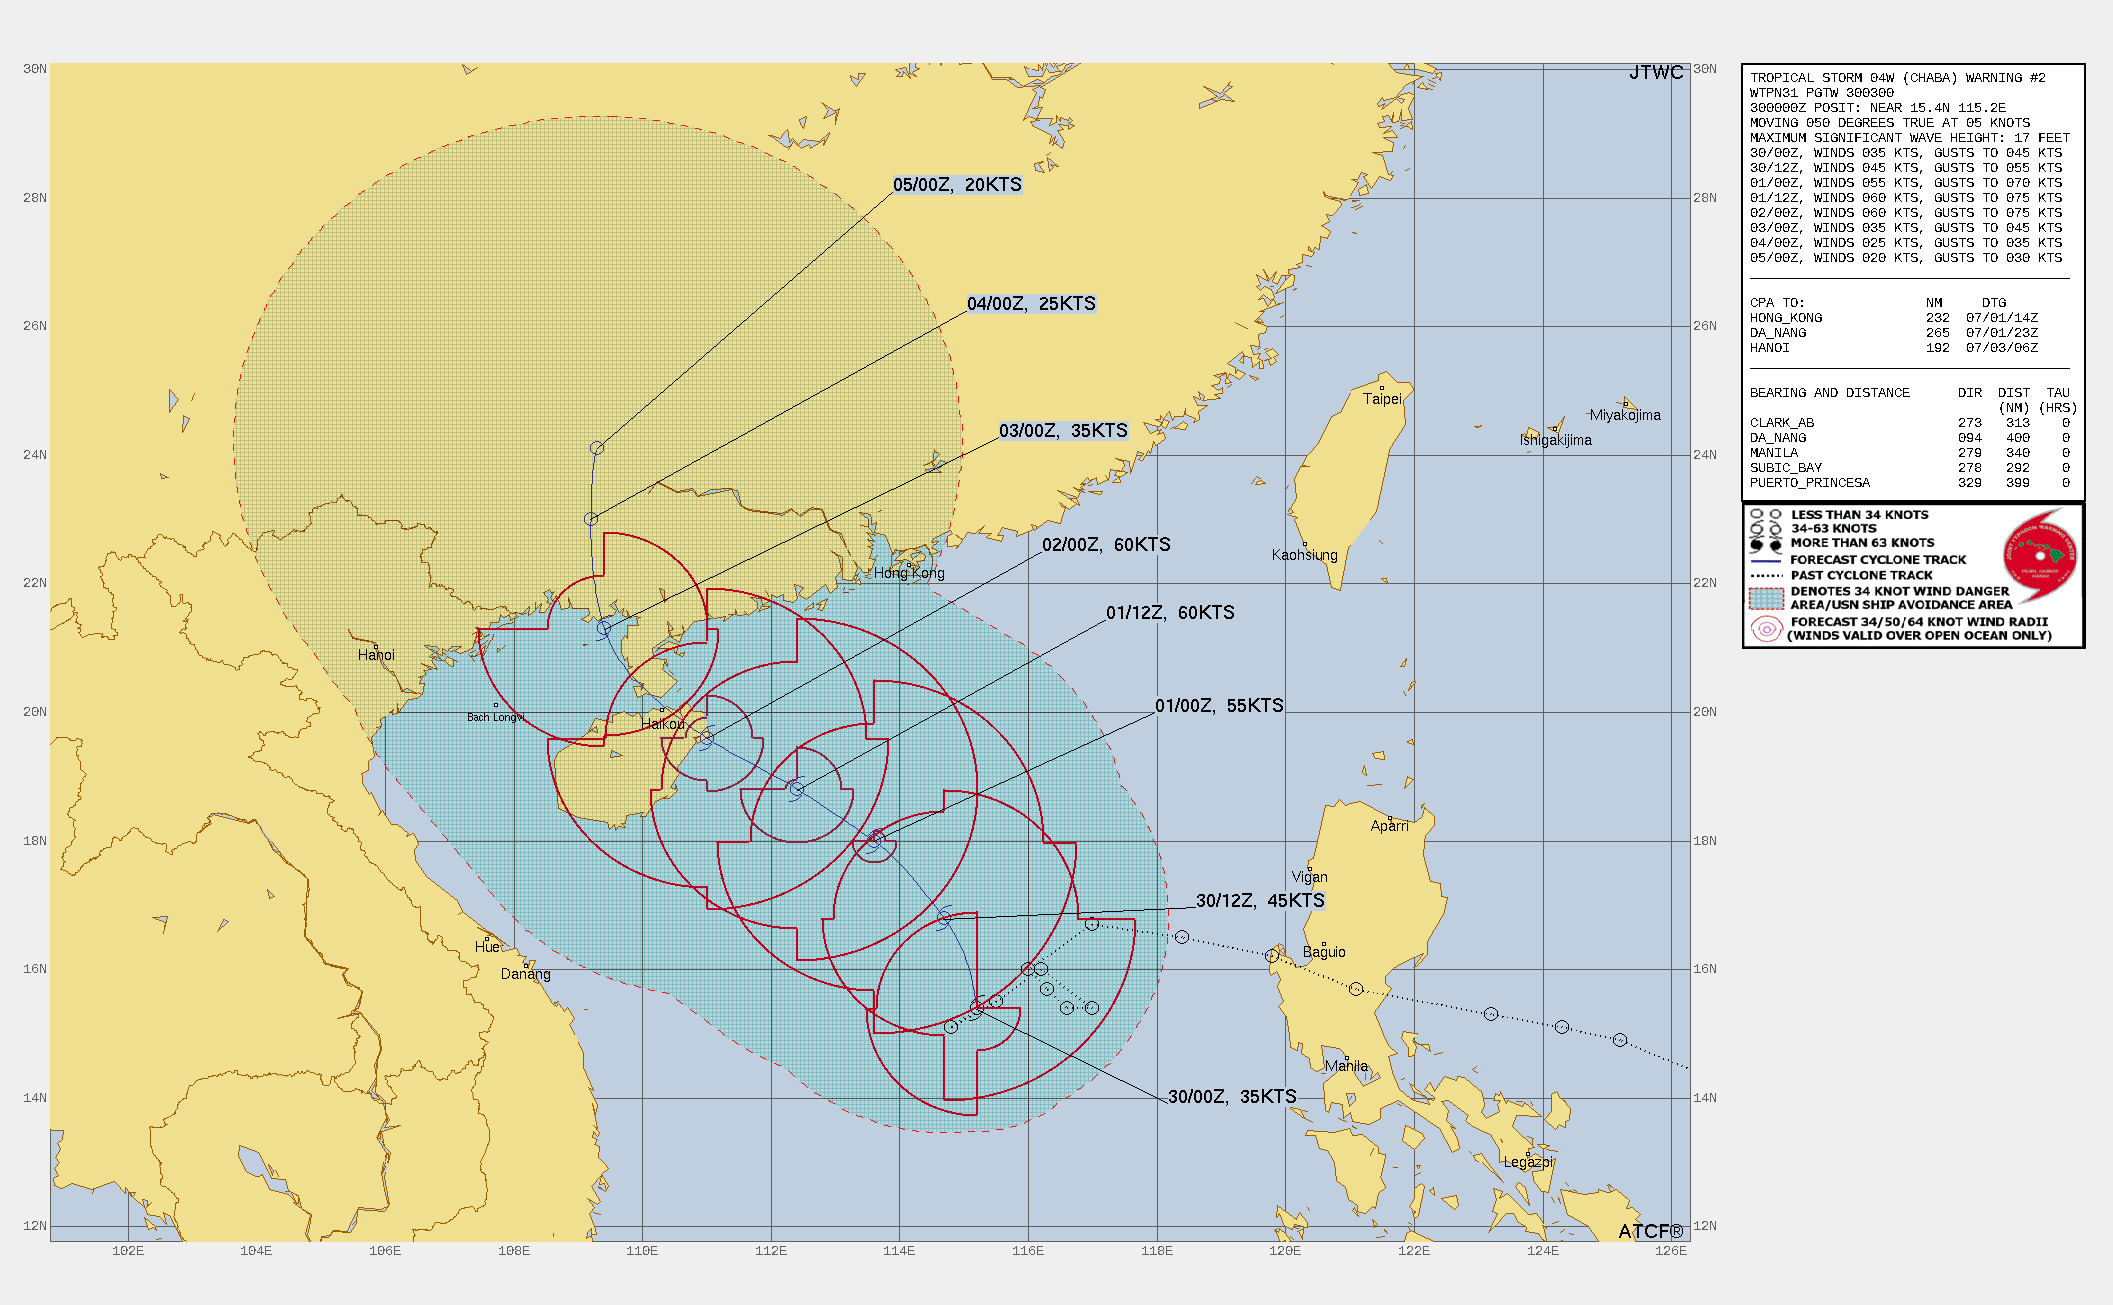 FORECAST REASONING.  SIGNIFICANT FORECAST CHANGES: INCREASING MAX INTENSITY TO 60 KTS BEGINNING AT TAU 36 THROUGH TAU 48, JUST BEFORE LANDFALL OVER EASTERN HAINAN.  FORECAST DISCUSSION: TS CHABA WILL TRACK NORTH-NORTHWESTWARD AND STRENGTHEN TO 55 KTS OVER THE NEXT 24 HOURS. BY TAU 36, THE STR TO THE NORTHEAST WILL BUILD IN CAUSING THE SYSTEM TO SHIFT TO A MORE NORTHWESTWARD TRACK. AT THIS TIME INTENSITY WILL INCREASE TO 60 KTS DUE TO TS CHABA PASSING UNDER AN AREA OF DECREASED VERTICAL WIND SHEAR (5-10KTS) AND KEEP INTENSITY AT 60 KTS BY TAU 48, JUST BEFORE PASSING OVER THE EASTERN PORTION OF THE ISLAND OF HAINAN. BY TAU 72, TS CHABA WILL SUCCUMB TO THE AFFECTS OF LAND INTERACTION BETWEEN HAINAN AND MAINLAND CHINA AND WILL DECREASE IN INTENSITY TO 35 KTS. TAUS 96 AND 120 TAKE THE SYSTEM OVER LAND IN SOUTHERN CHINA WHERE DISSIPATION WILL OCCUR.